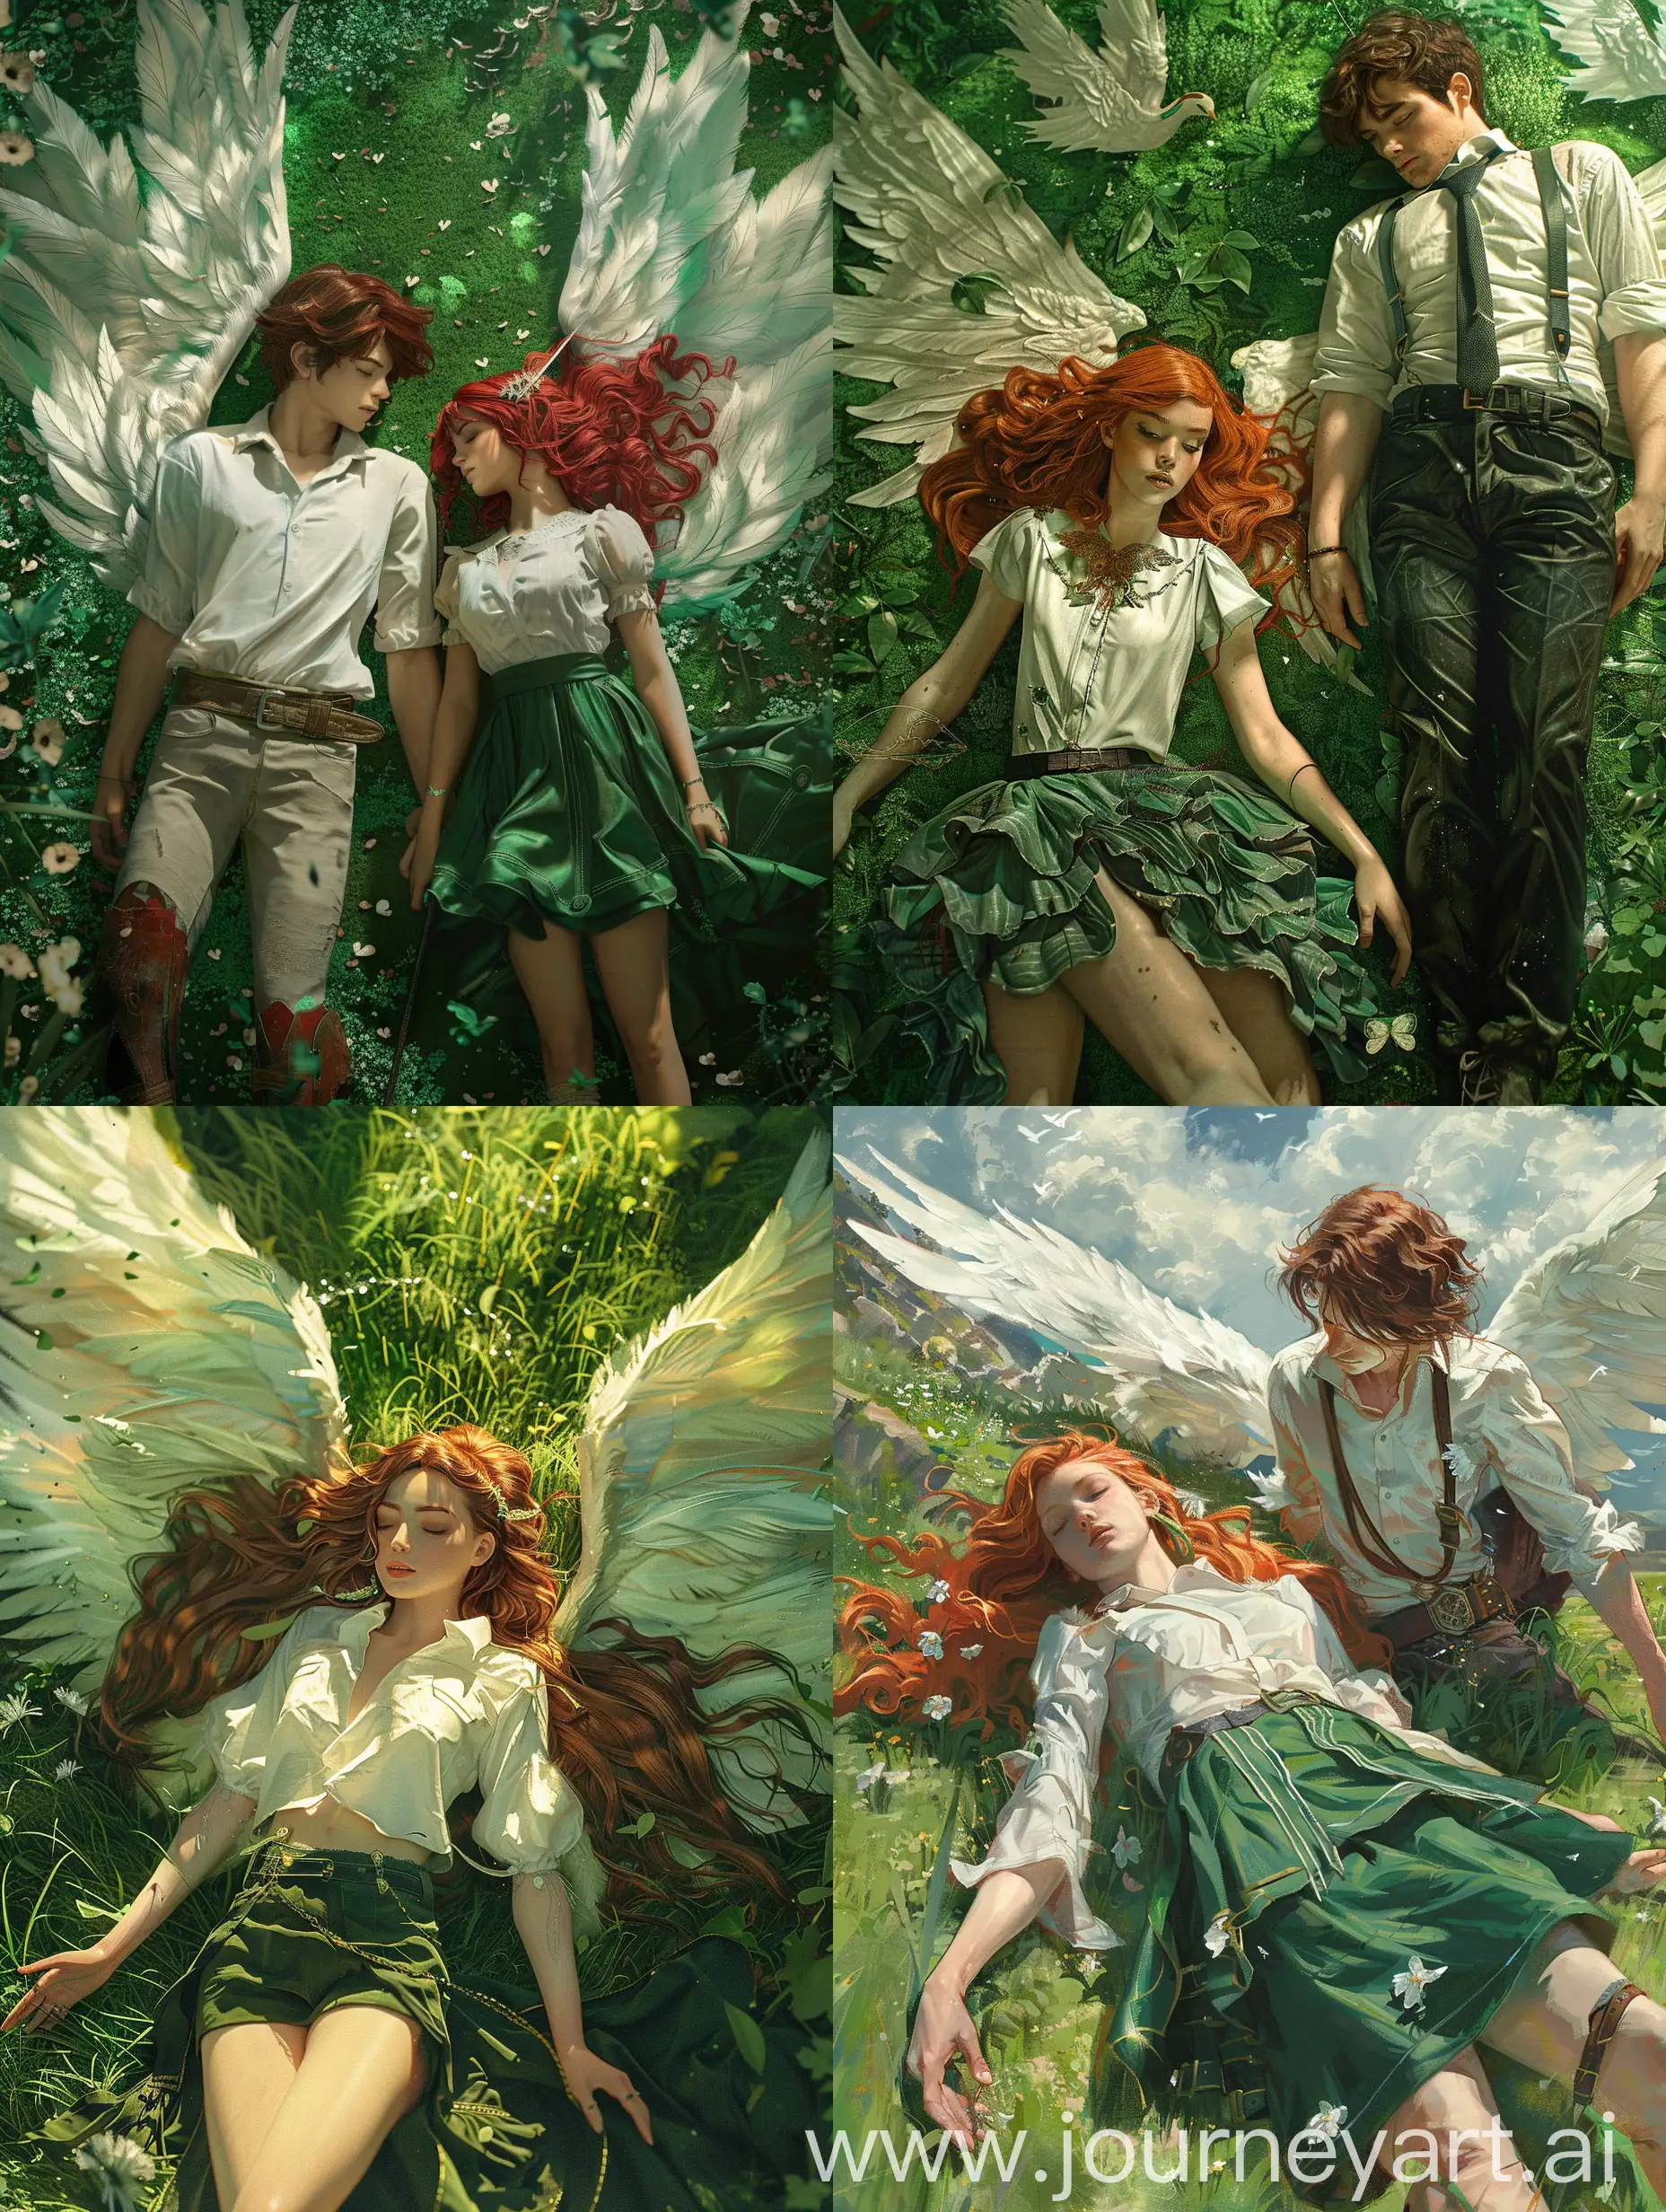 Fantasy-Scene-RedHaired-Girl-in-White-Shirt-and-Green-Skirt-with-Winged-Man-at-Heavenly-Academy